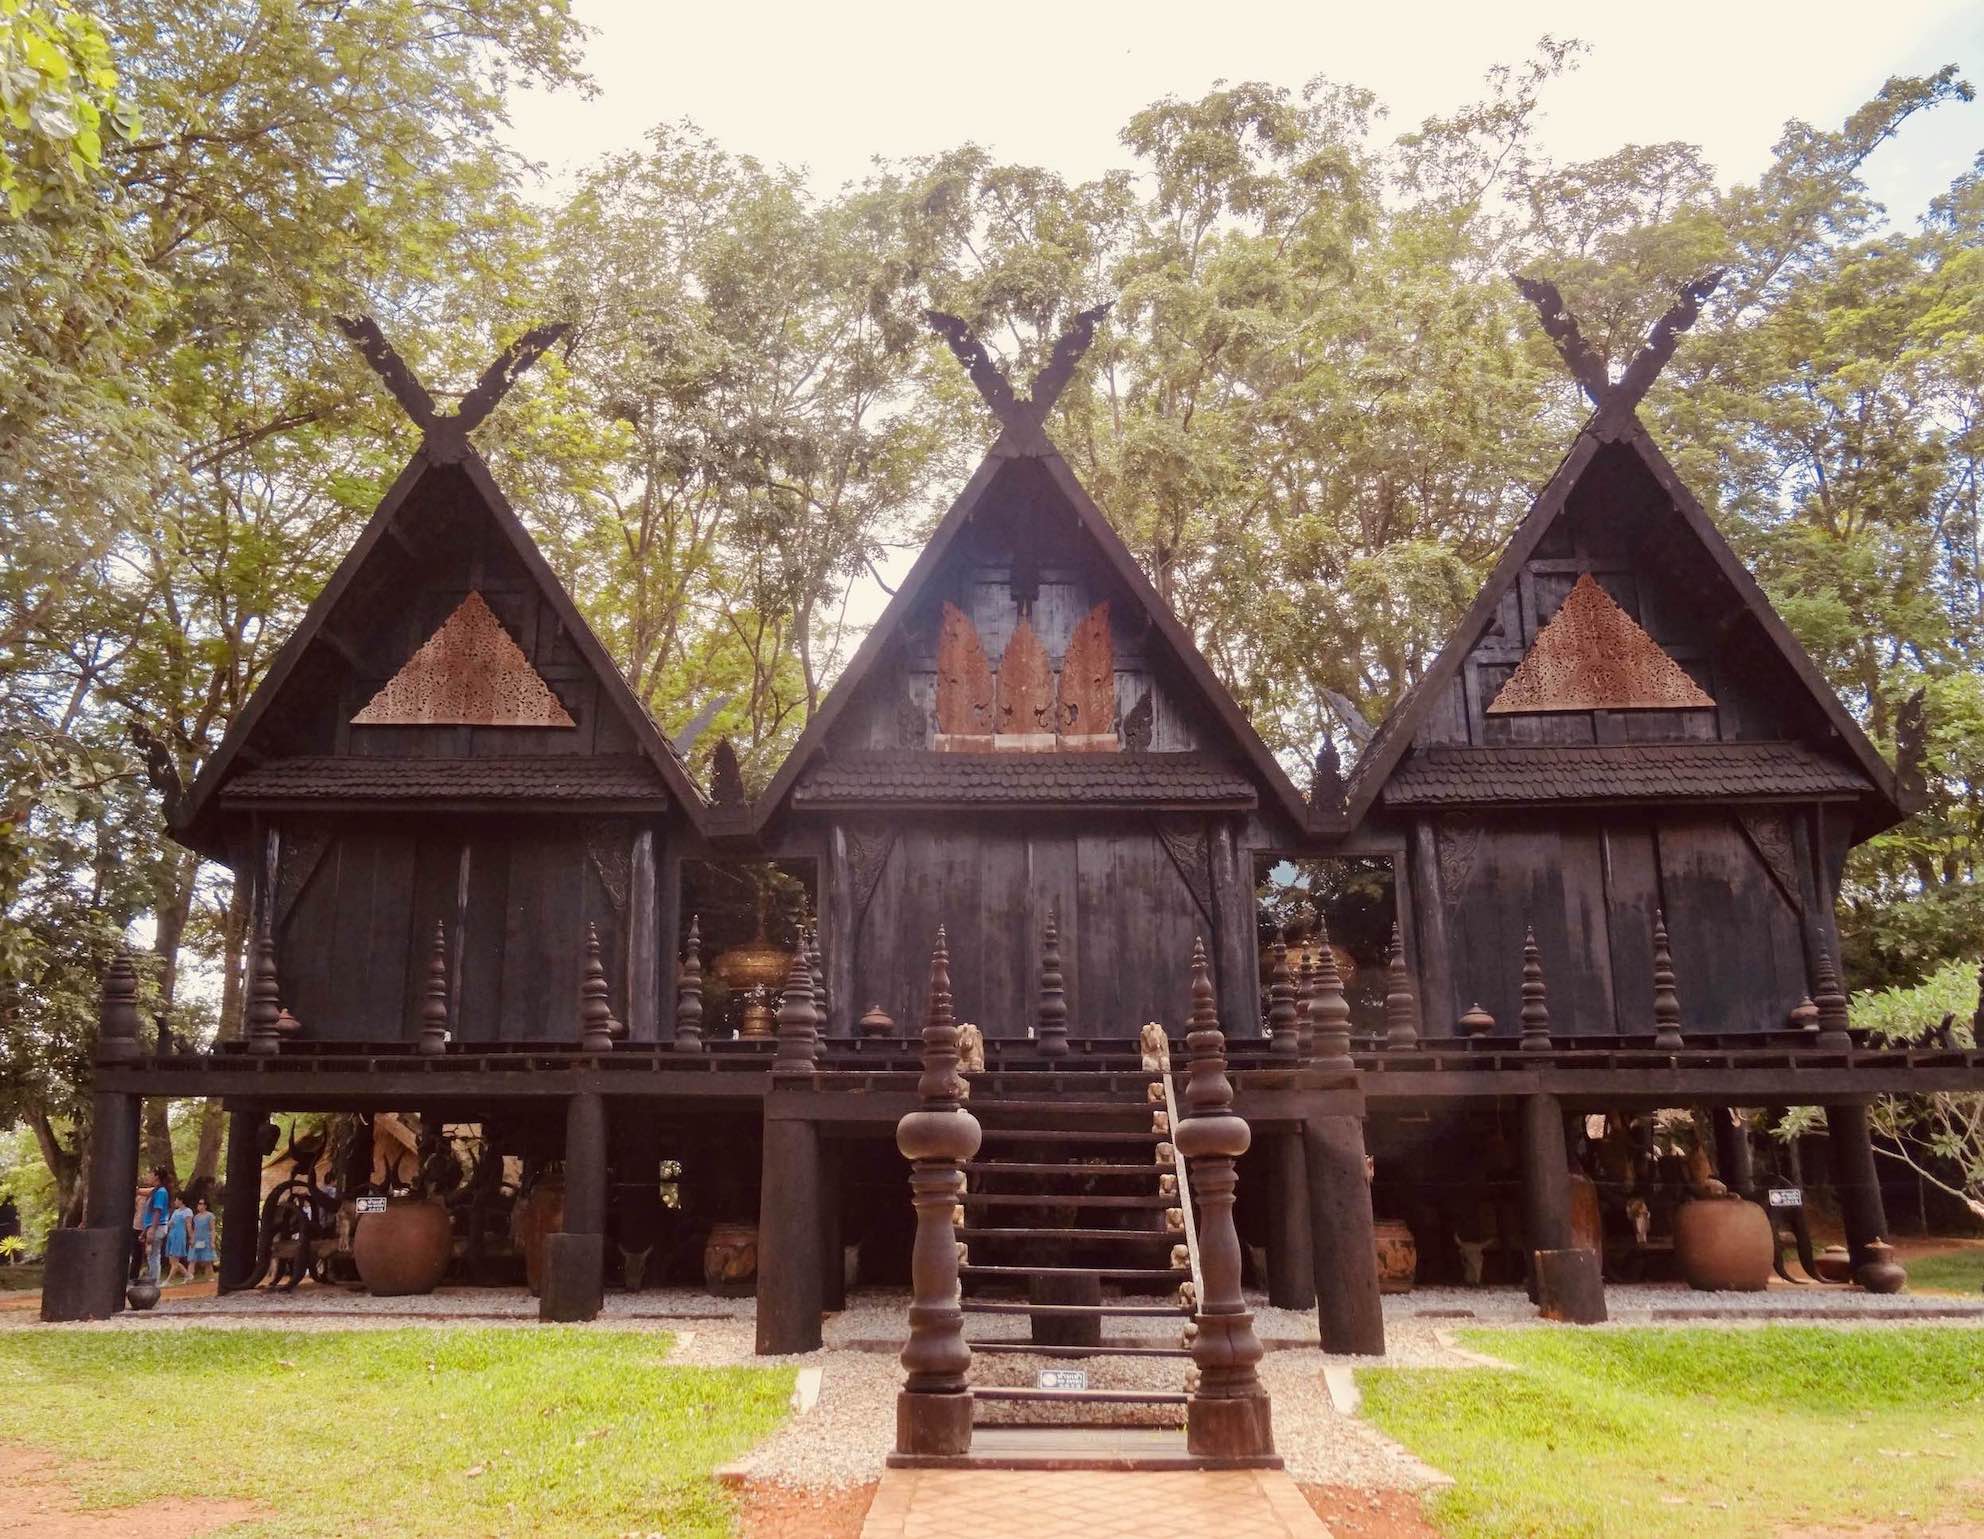 The dark wooden structures of The Black House Museum in Chiang Rai